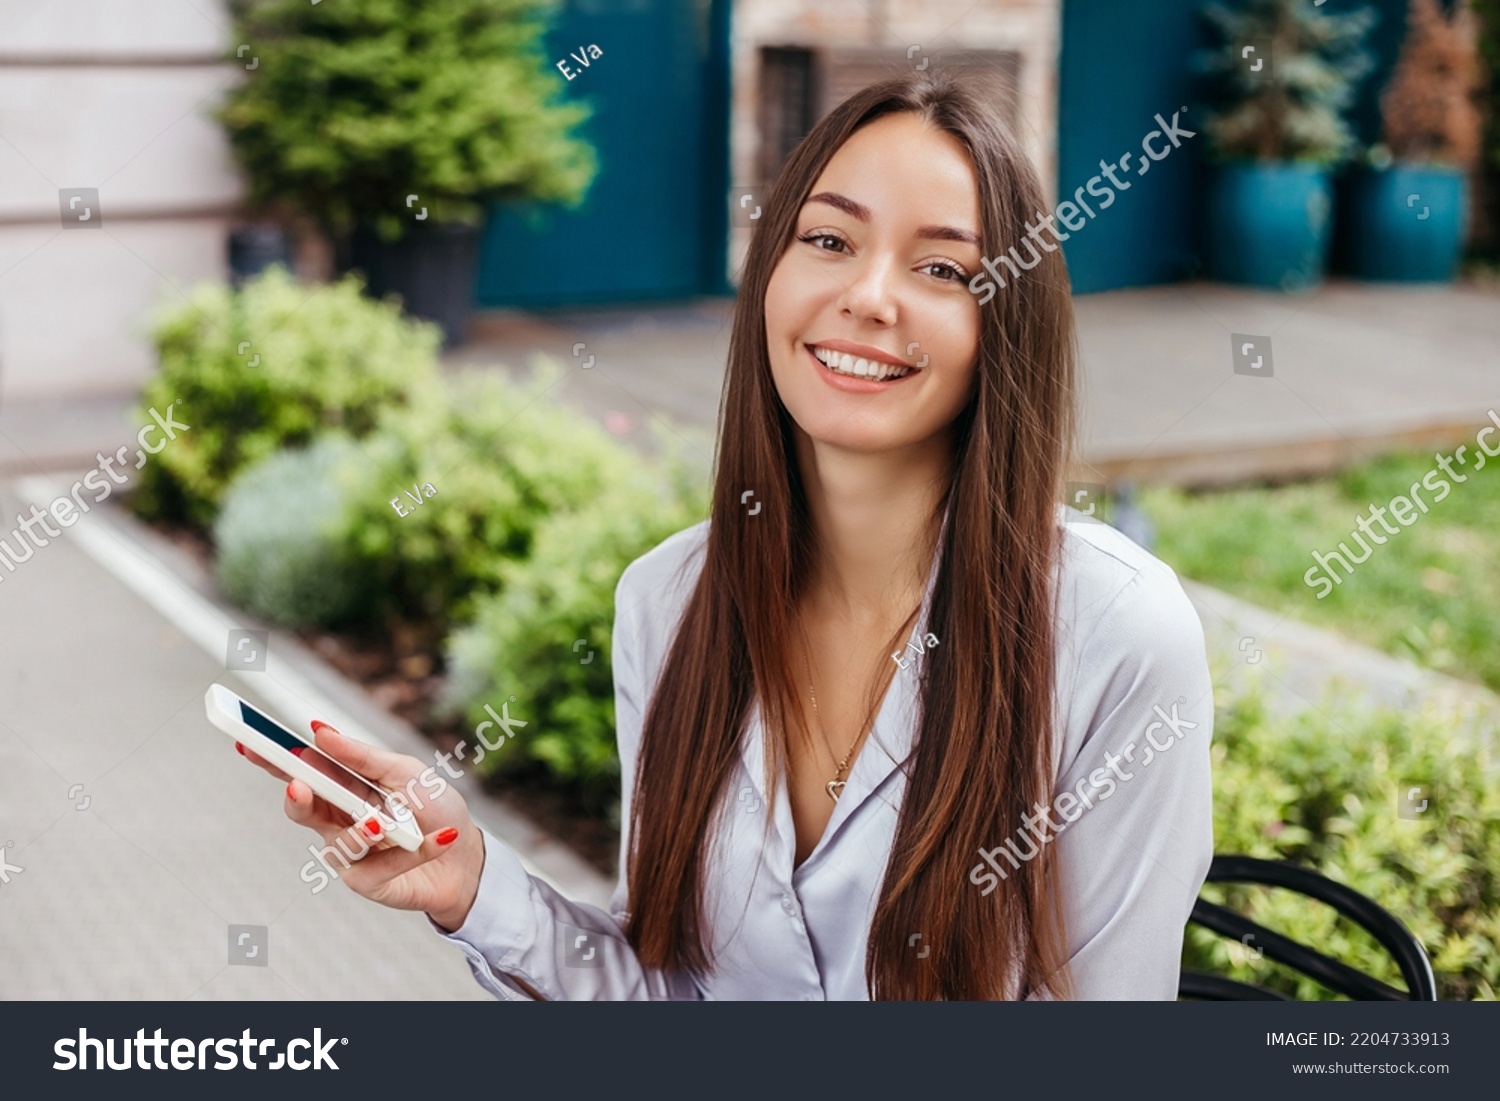 Portrait of a smiling girl with a mobile phone against the background of the facade of the cafe building. young brunette woman using a mobile phone and looking at the camera. Distant work #2204733913